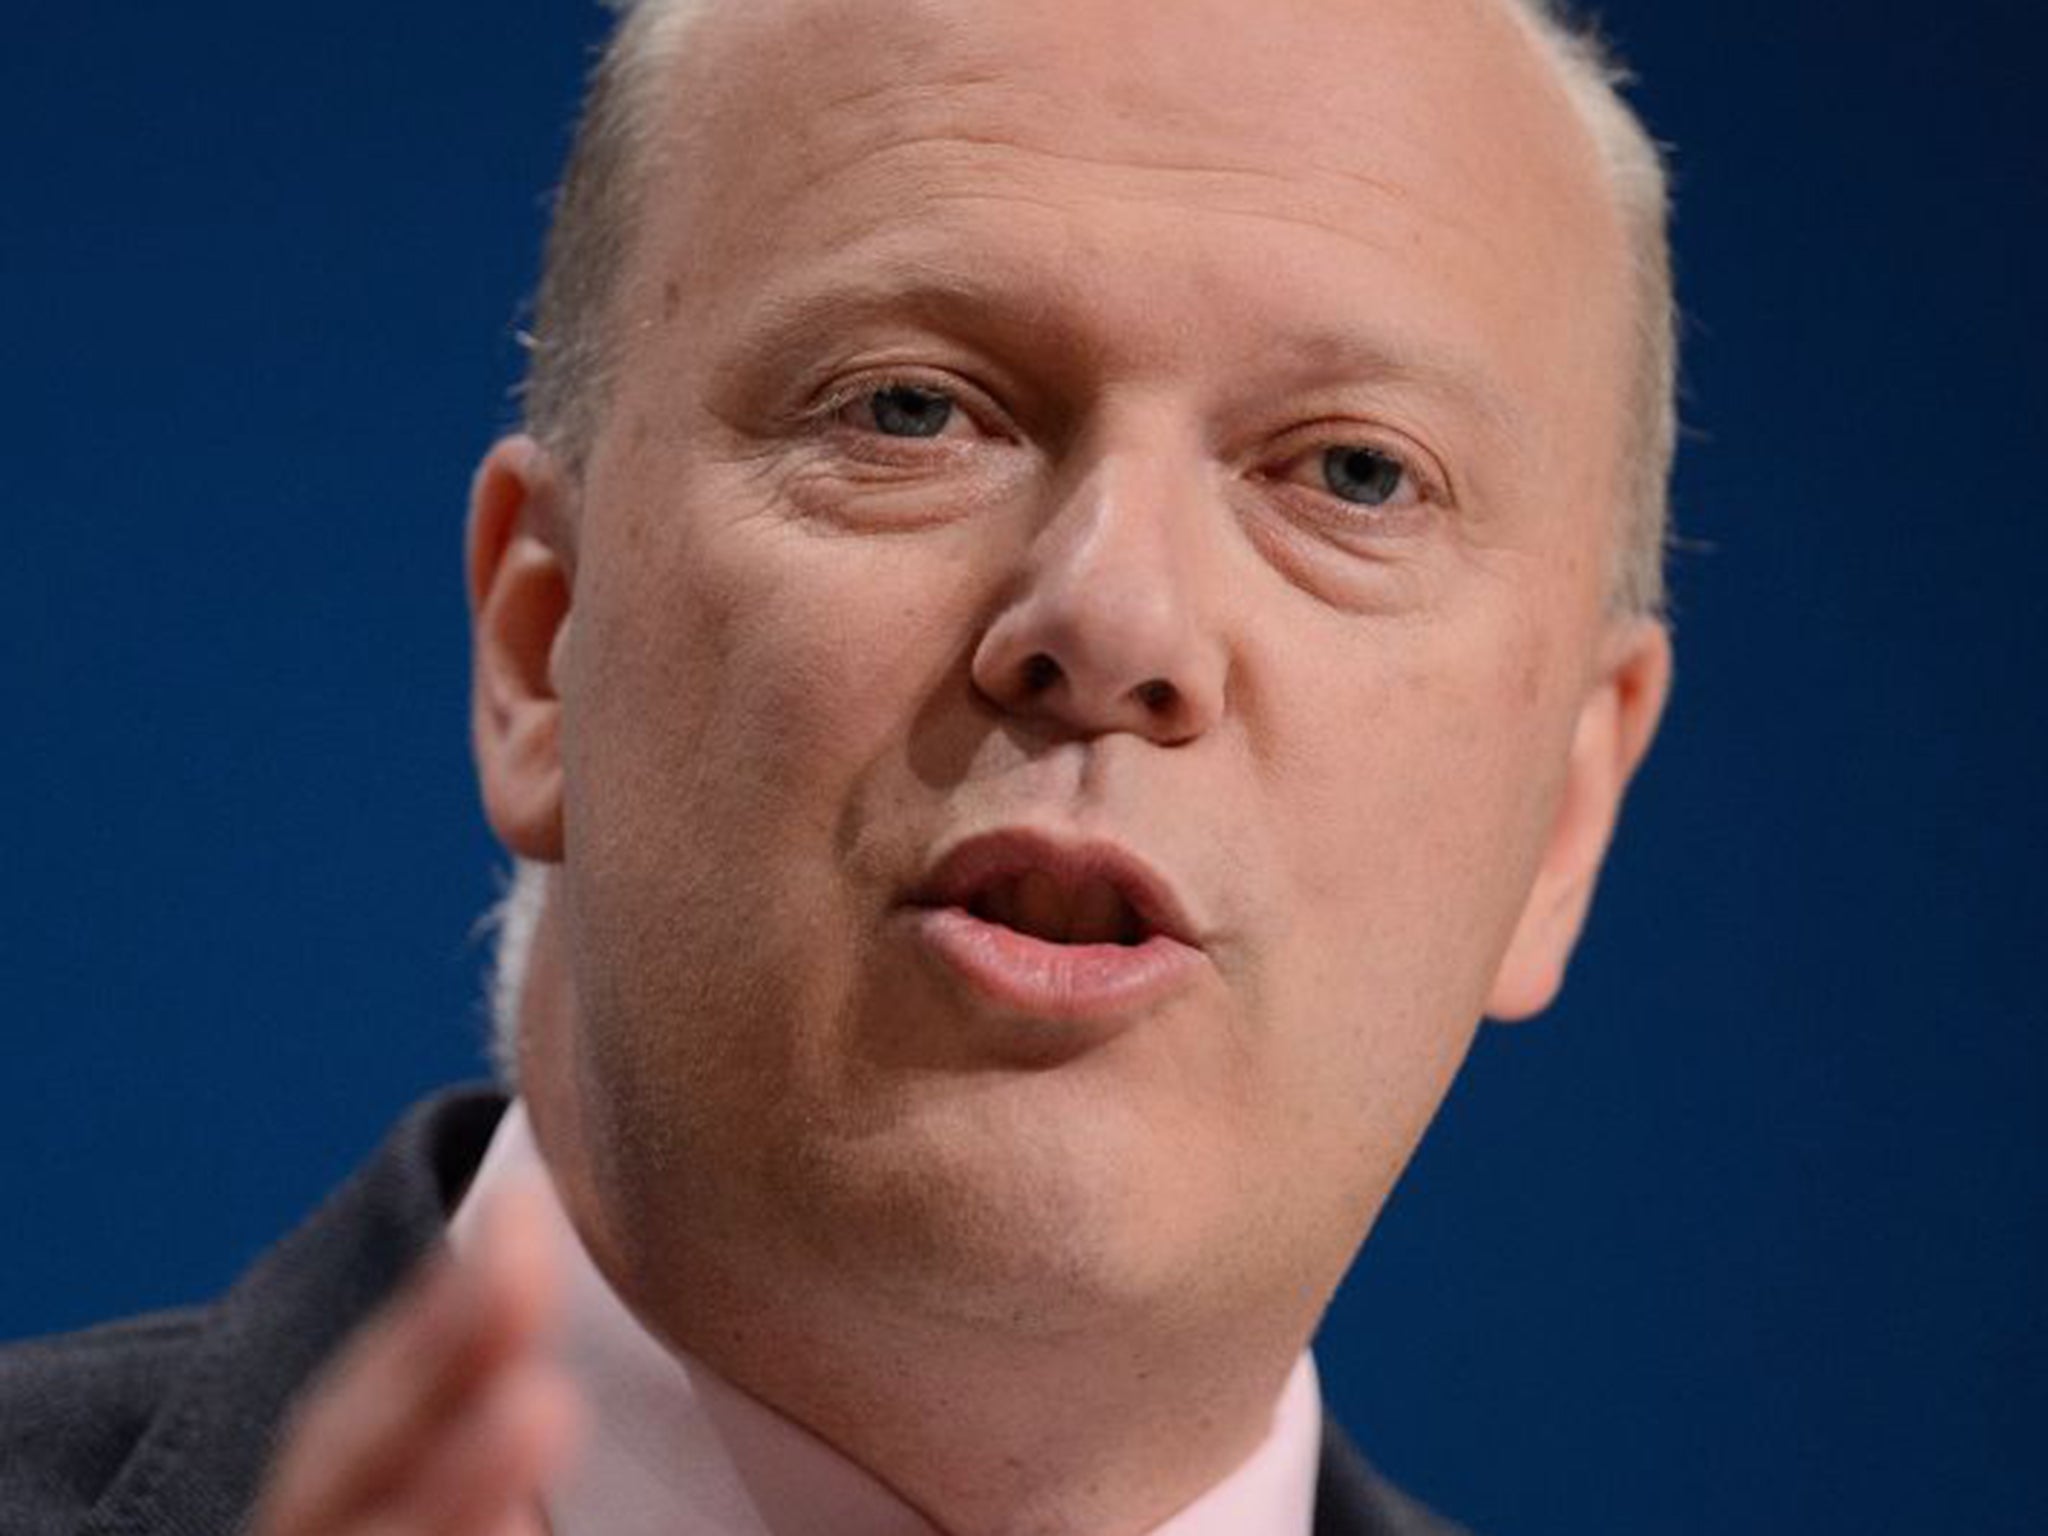 &#13;
Former Justice Secretary Chris Grayling (AFP/Getty Images)&#13;